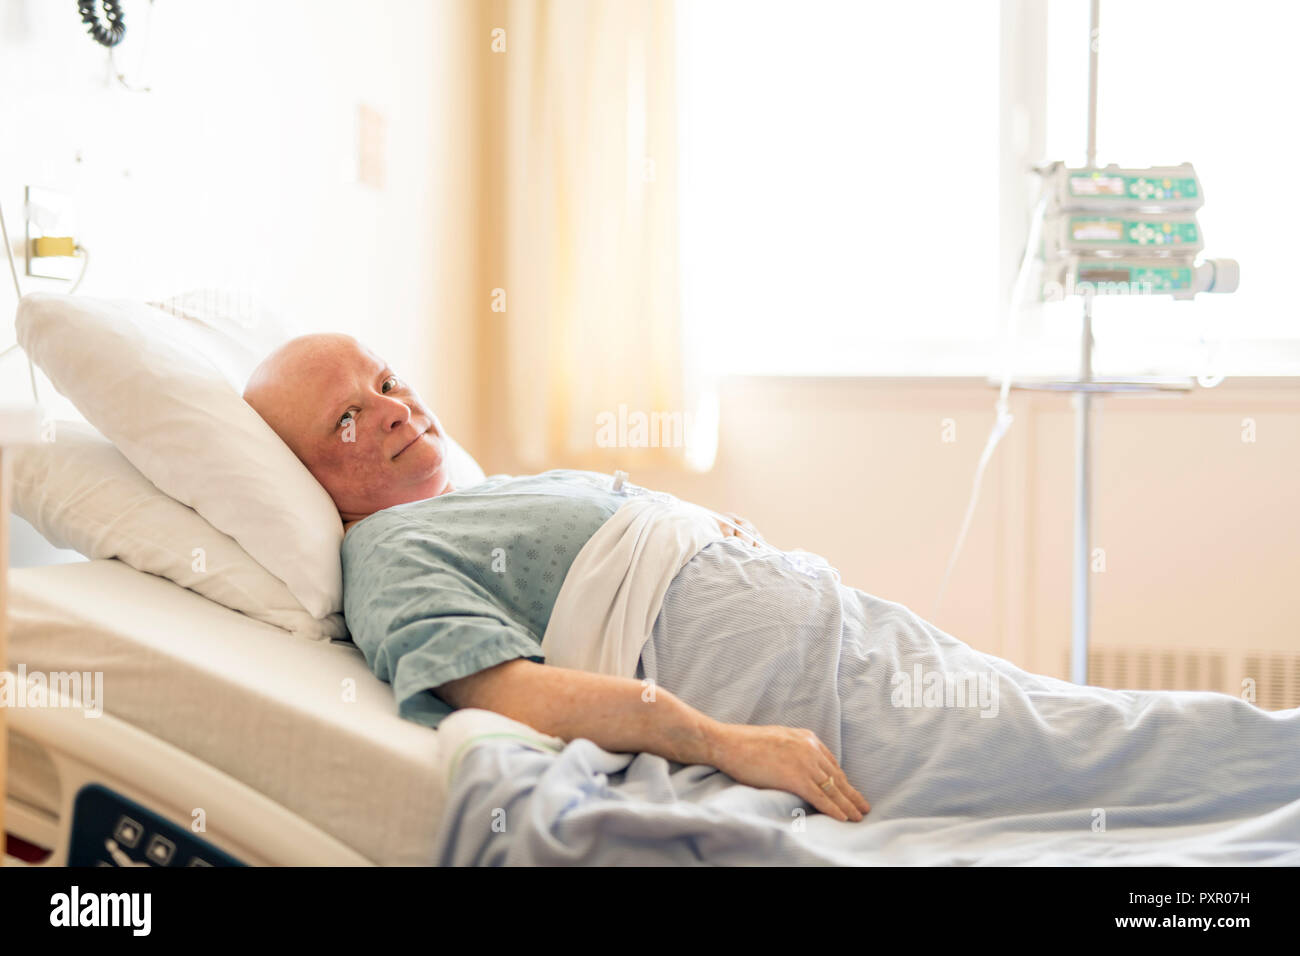 Bed Room Cancer Patient Stock Photos Bed Room Cancer